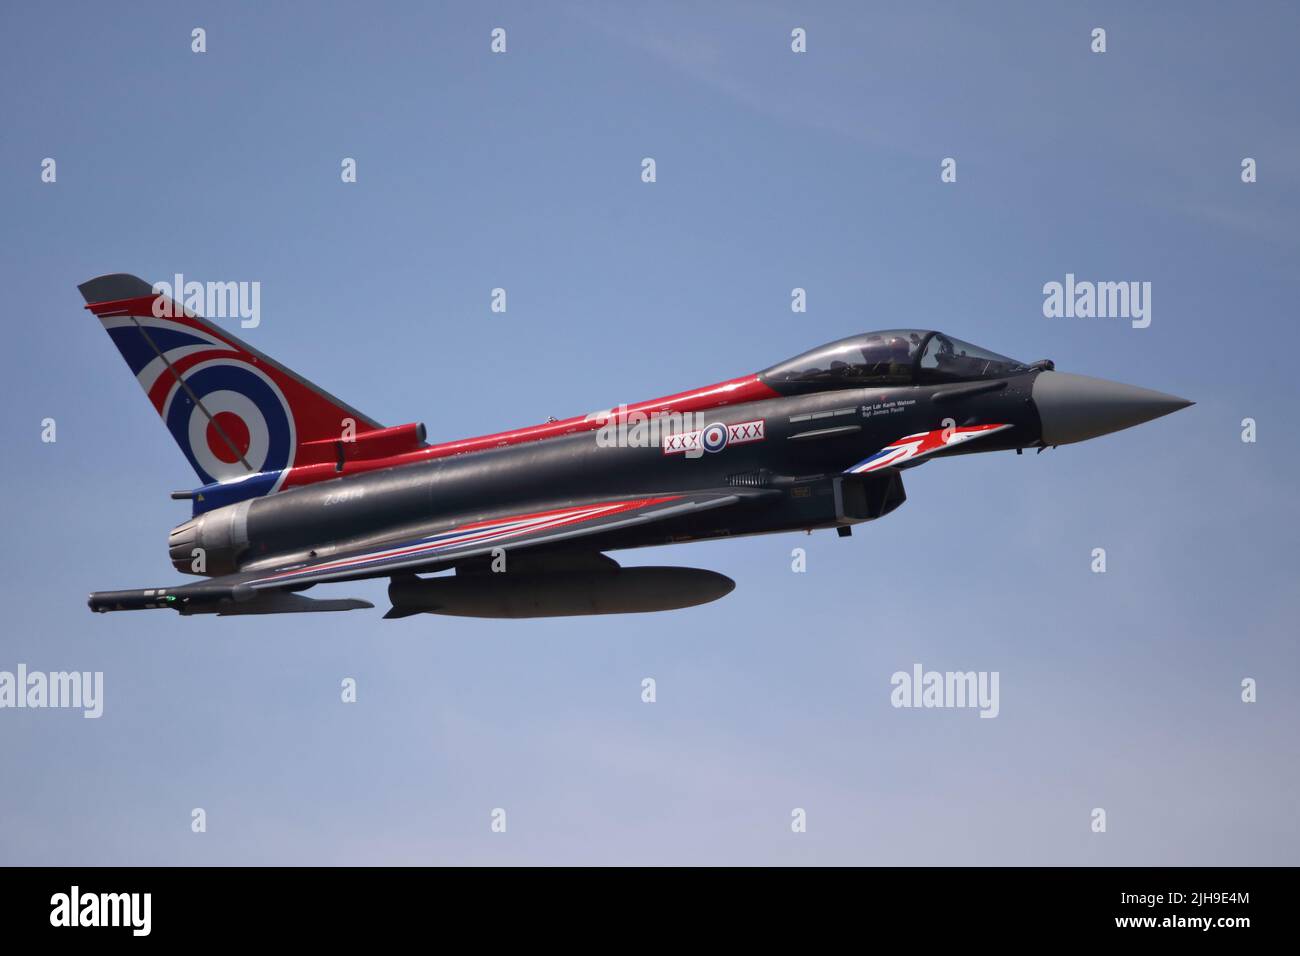 Fairford, UK. 16th July, 2022. Military planes from across the globe on display for the RIAT Royal International Air Tattoo. The RAF fielded a Typhoon Eurofighter with a special livery. Credit: Uwe Deffner/Alamy Live News Stock Photo